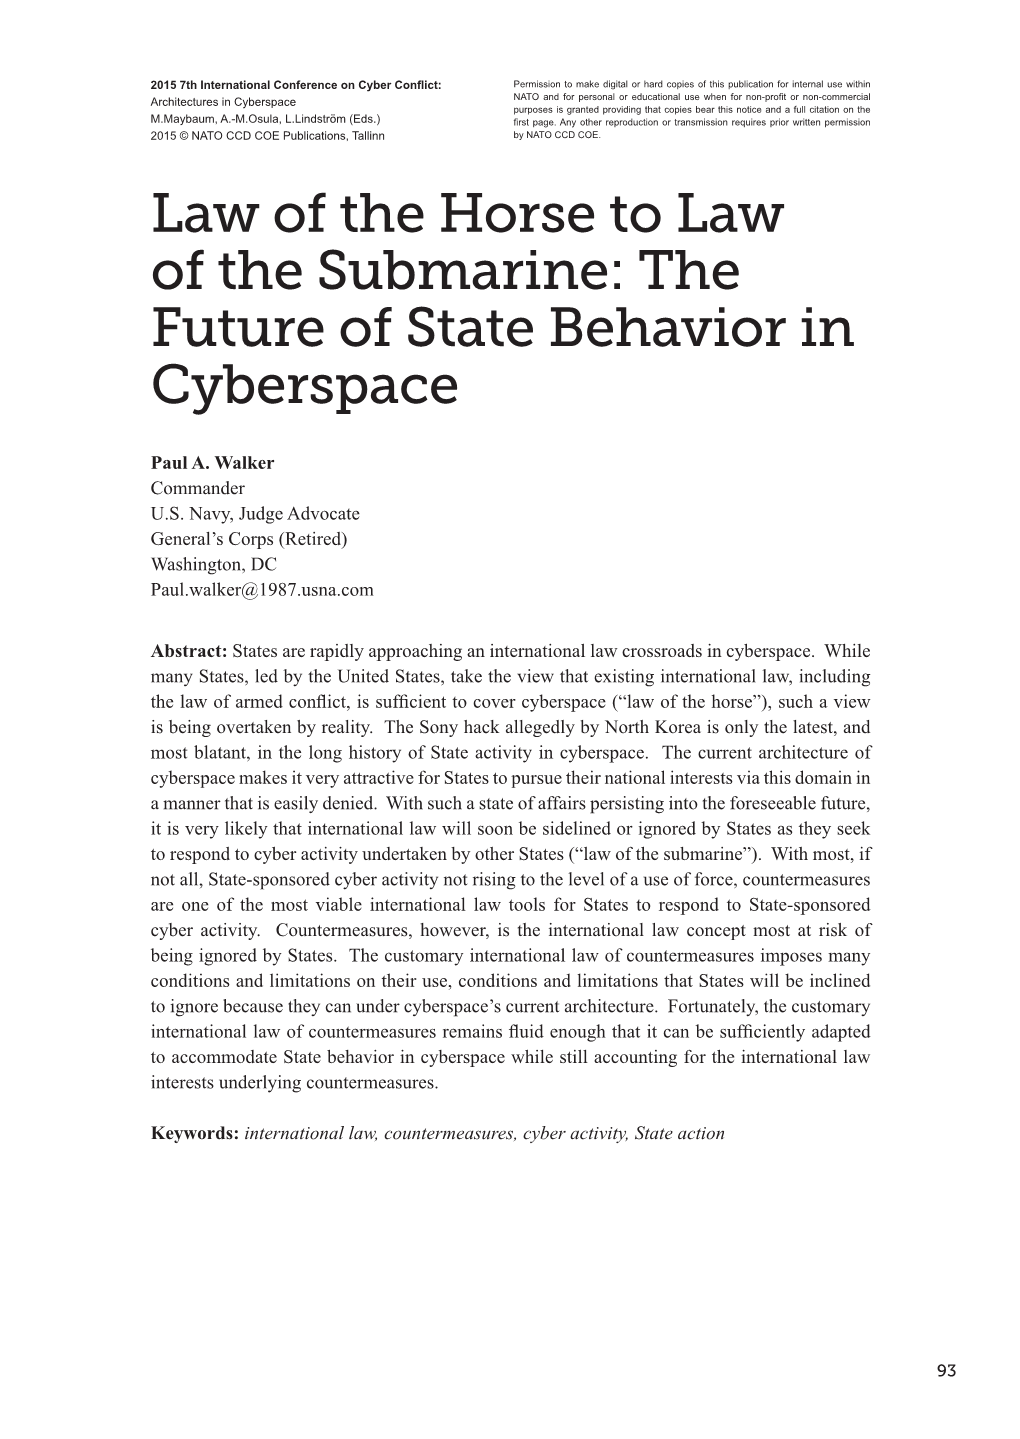 The Future of State Behavior in Cyberspace